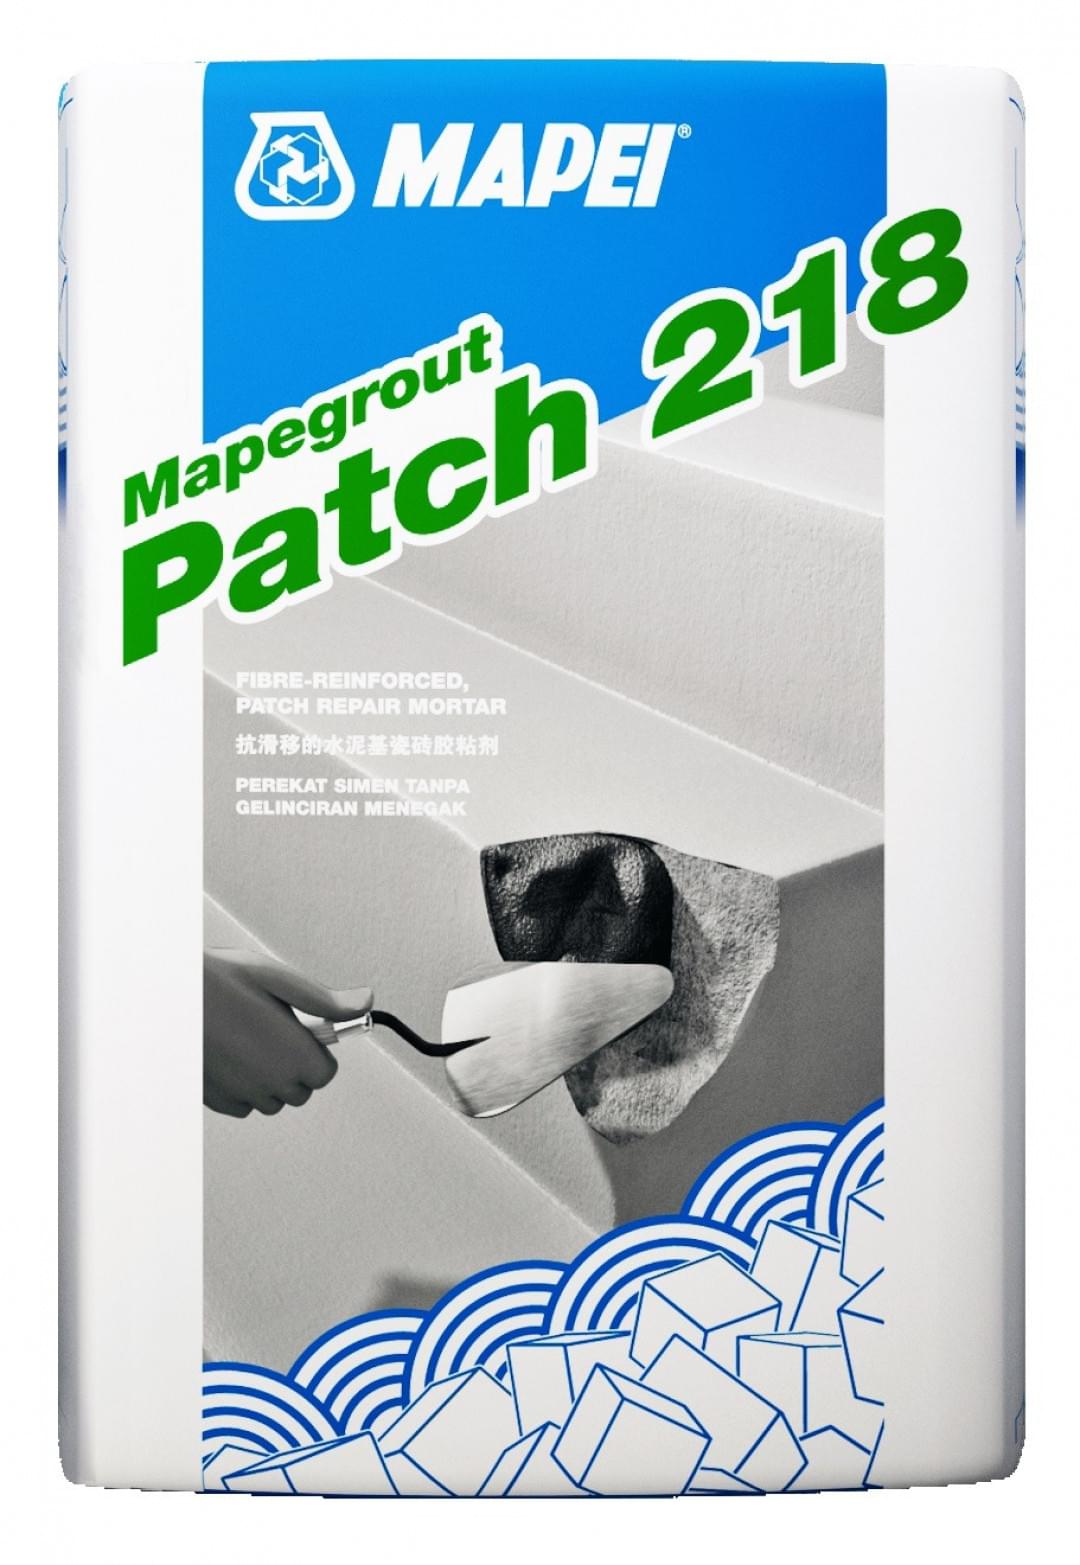 MAPEGROUT PATCH 218 from MAPEI